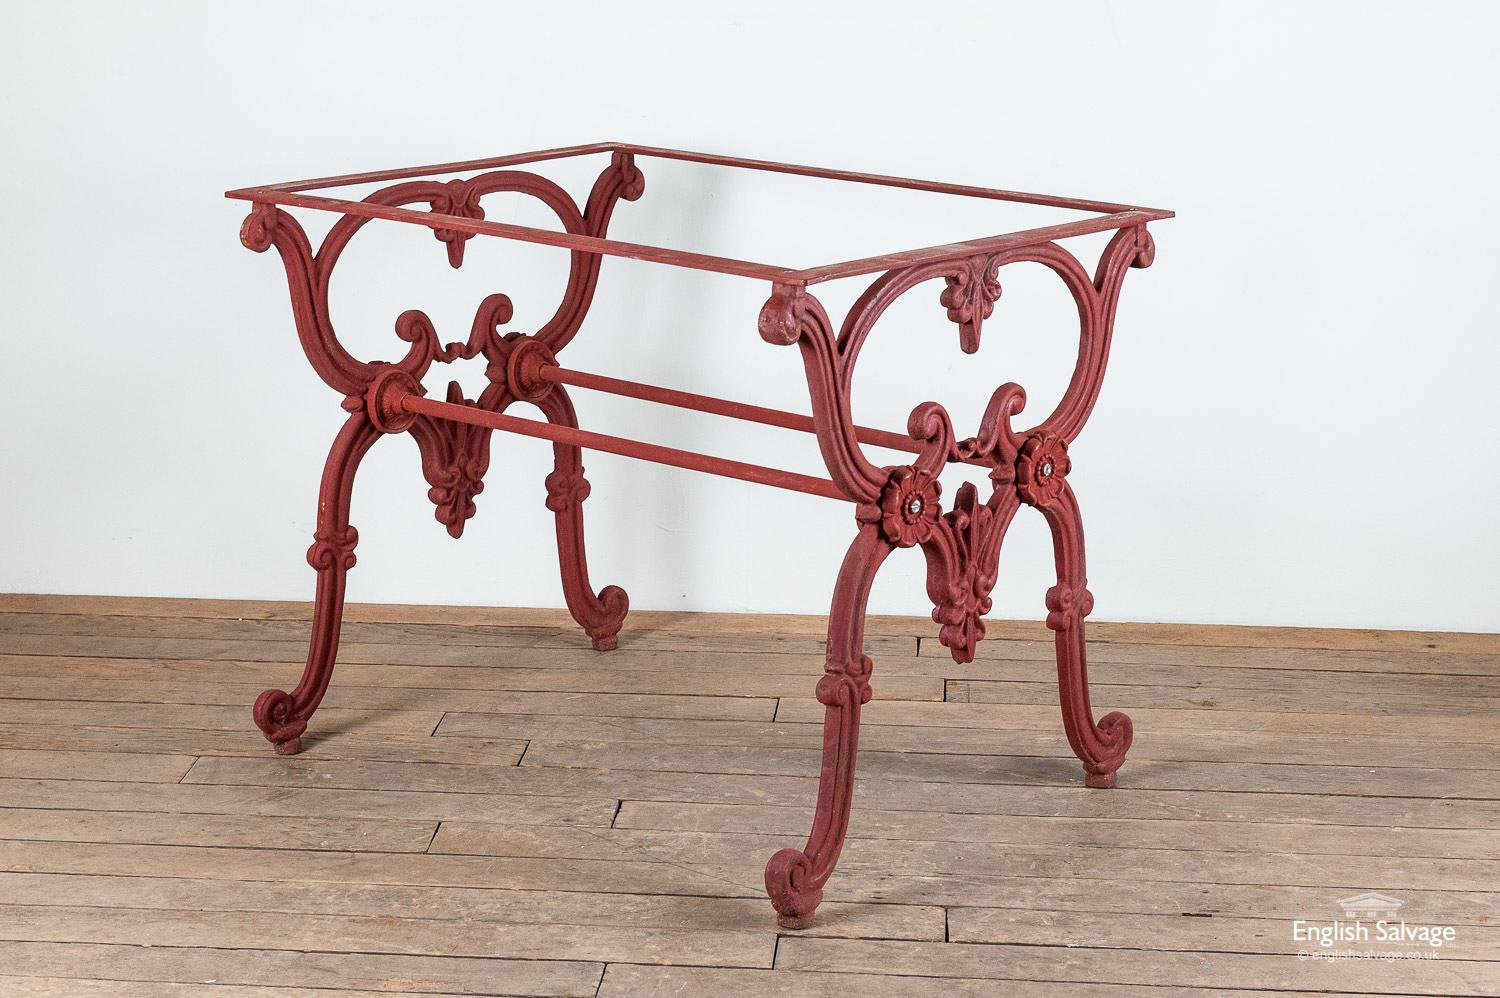 Salvaged cast iron table base with ornate floral and foliate detailing. The table appears to painted in red oxide paint. There are two support rails below the table top. This would look amazing with a marble, granite or wood top.